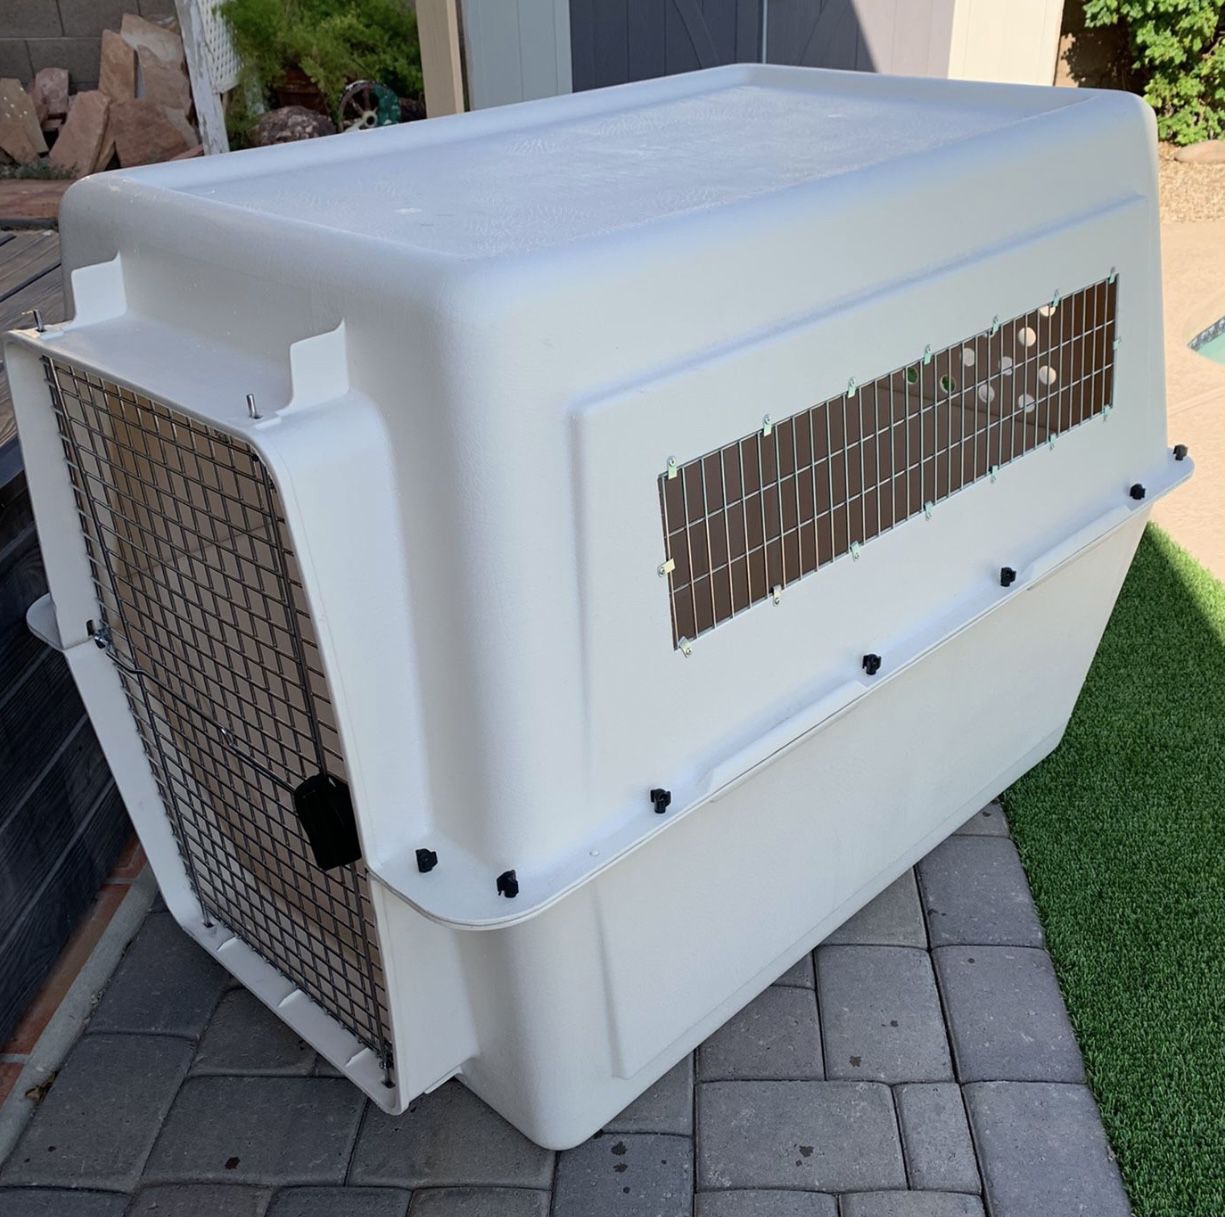 Petmate Xl Travel Dog Kennel Used Twice Very Clean !! Missing Door !!